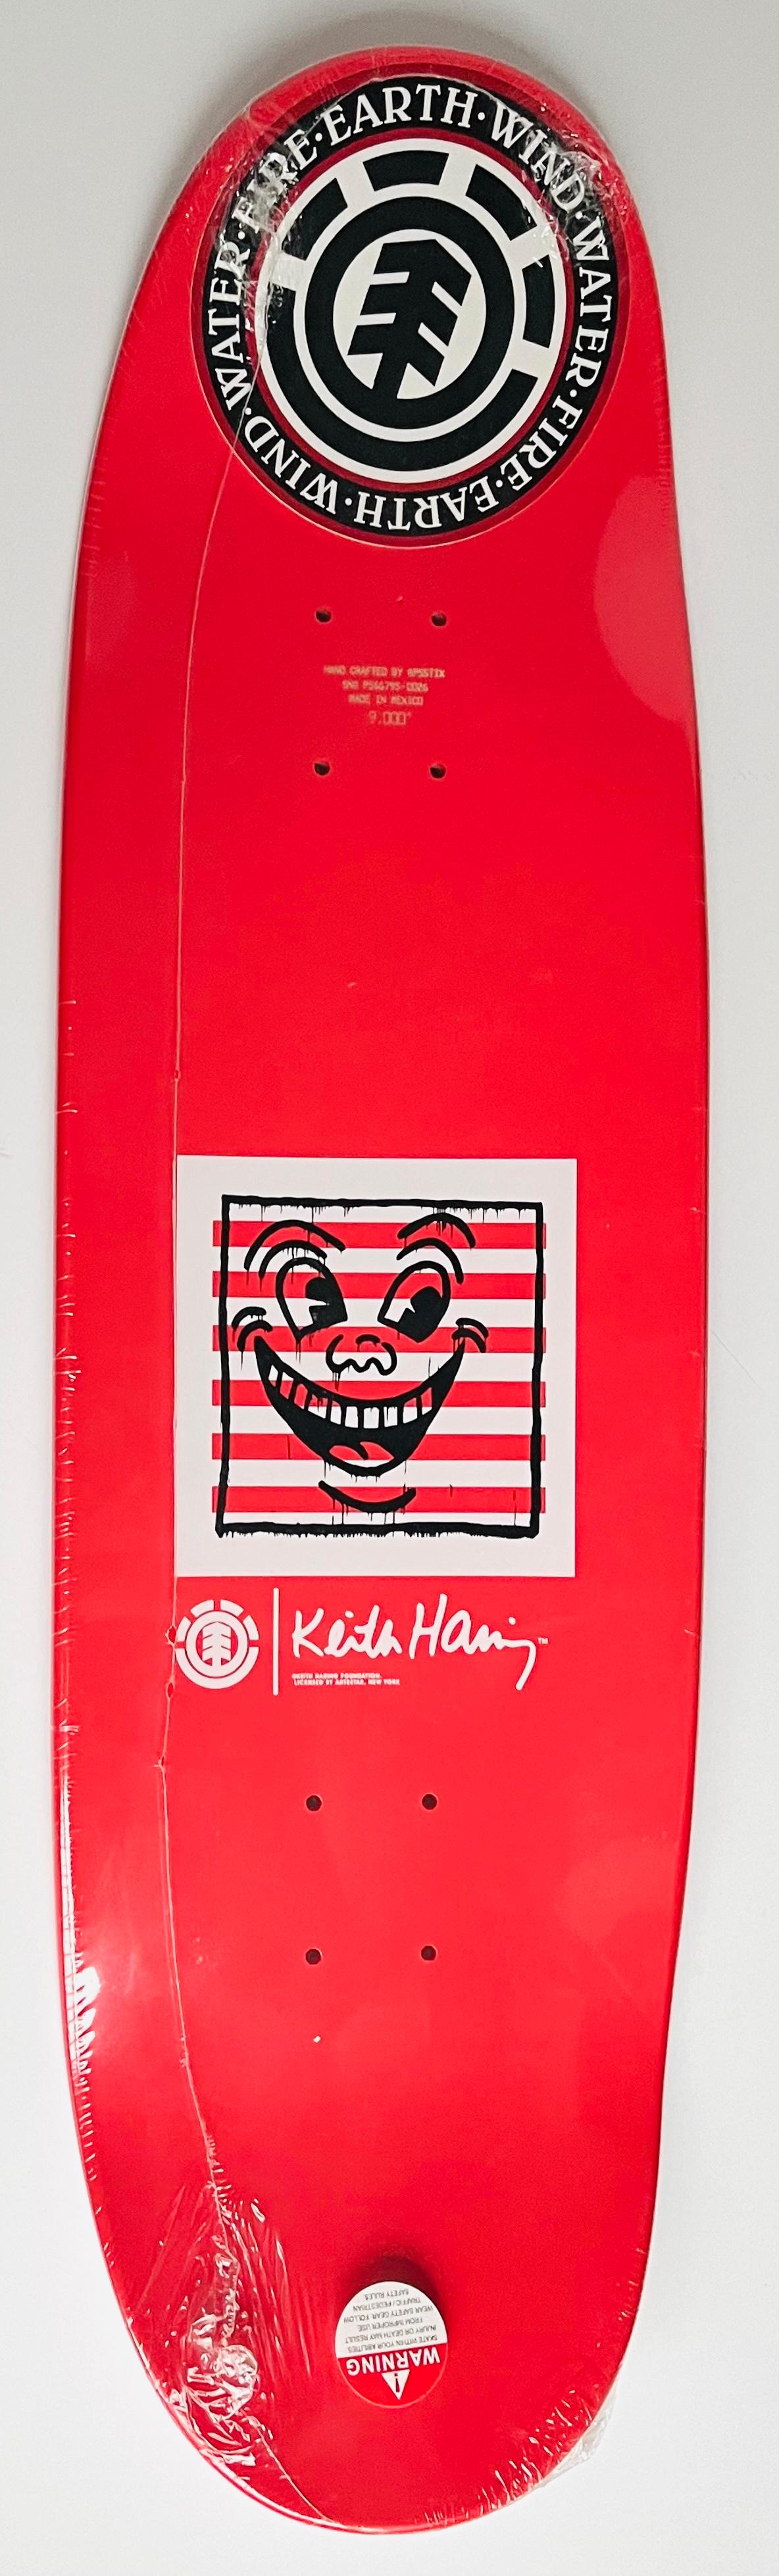 Keith Haring Skateboard Deck 2019:
Sold out, limited edition estate trademarked Keith Haring Skateboard Deck featuring the artist's iconic imagery. This work is from a sold out collaboration between Element skateboards and the Keith Haring